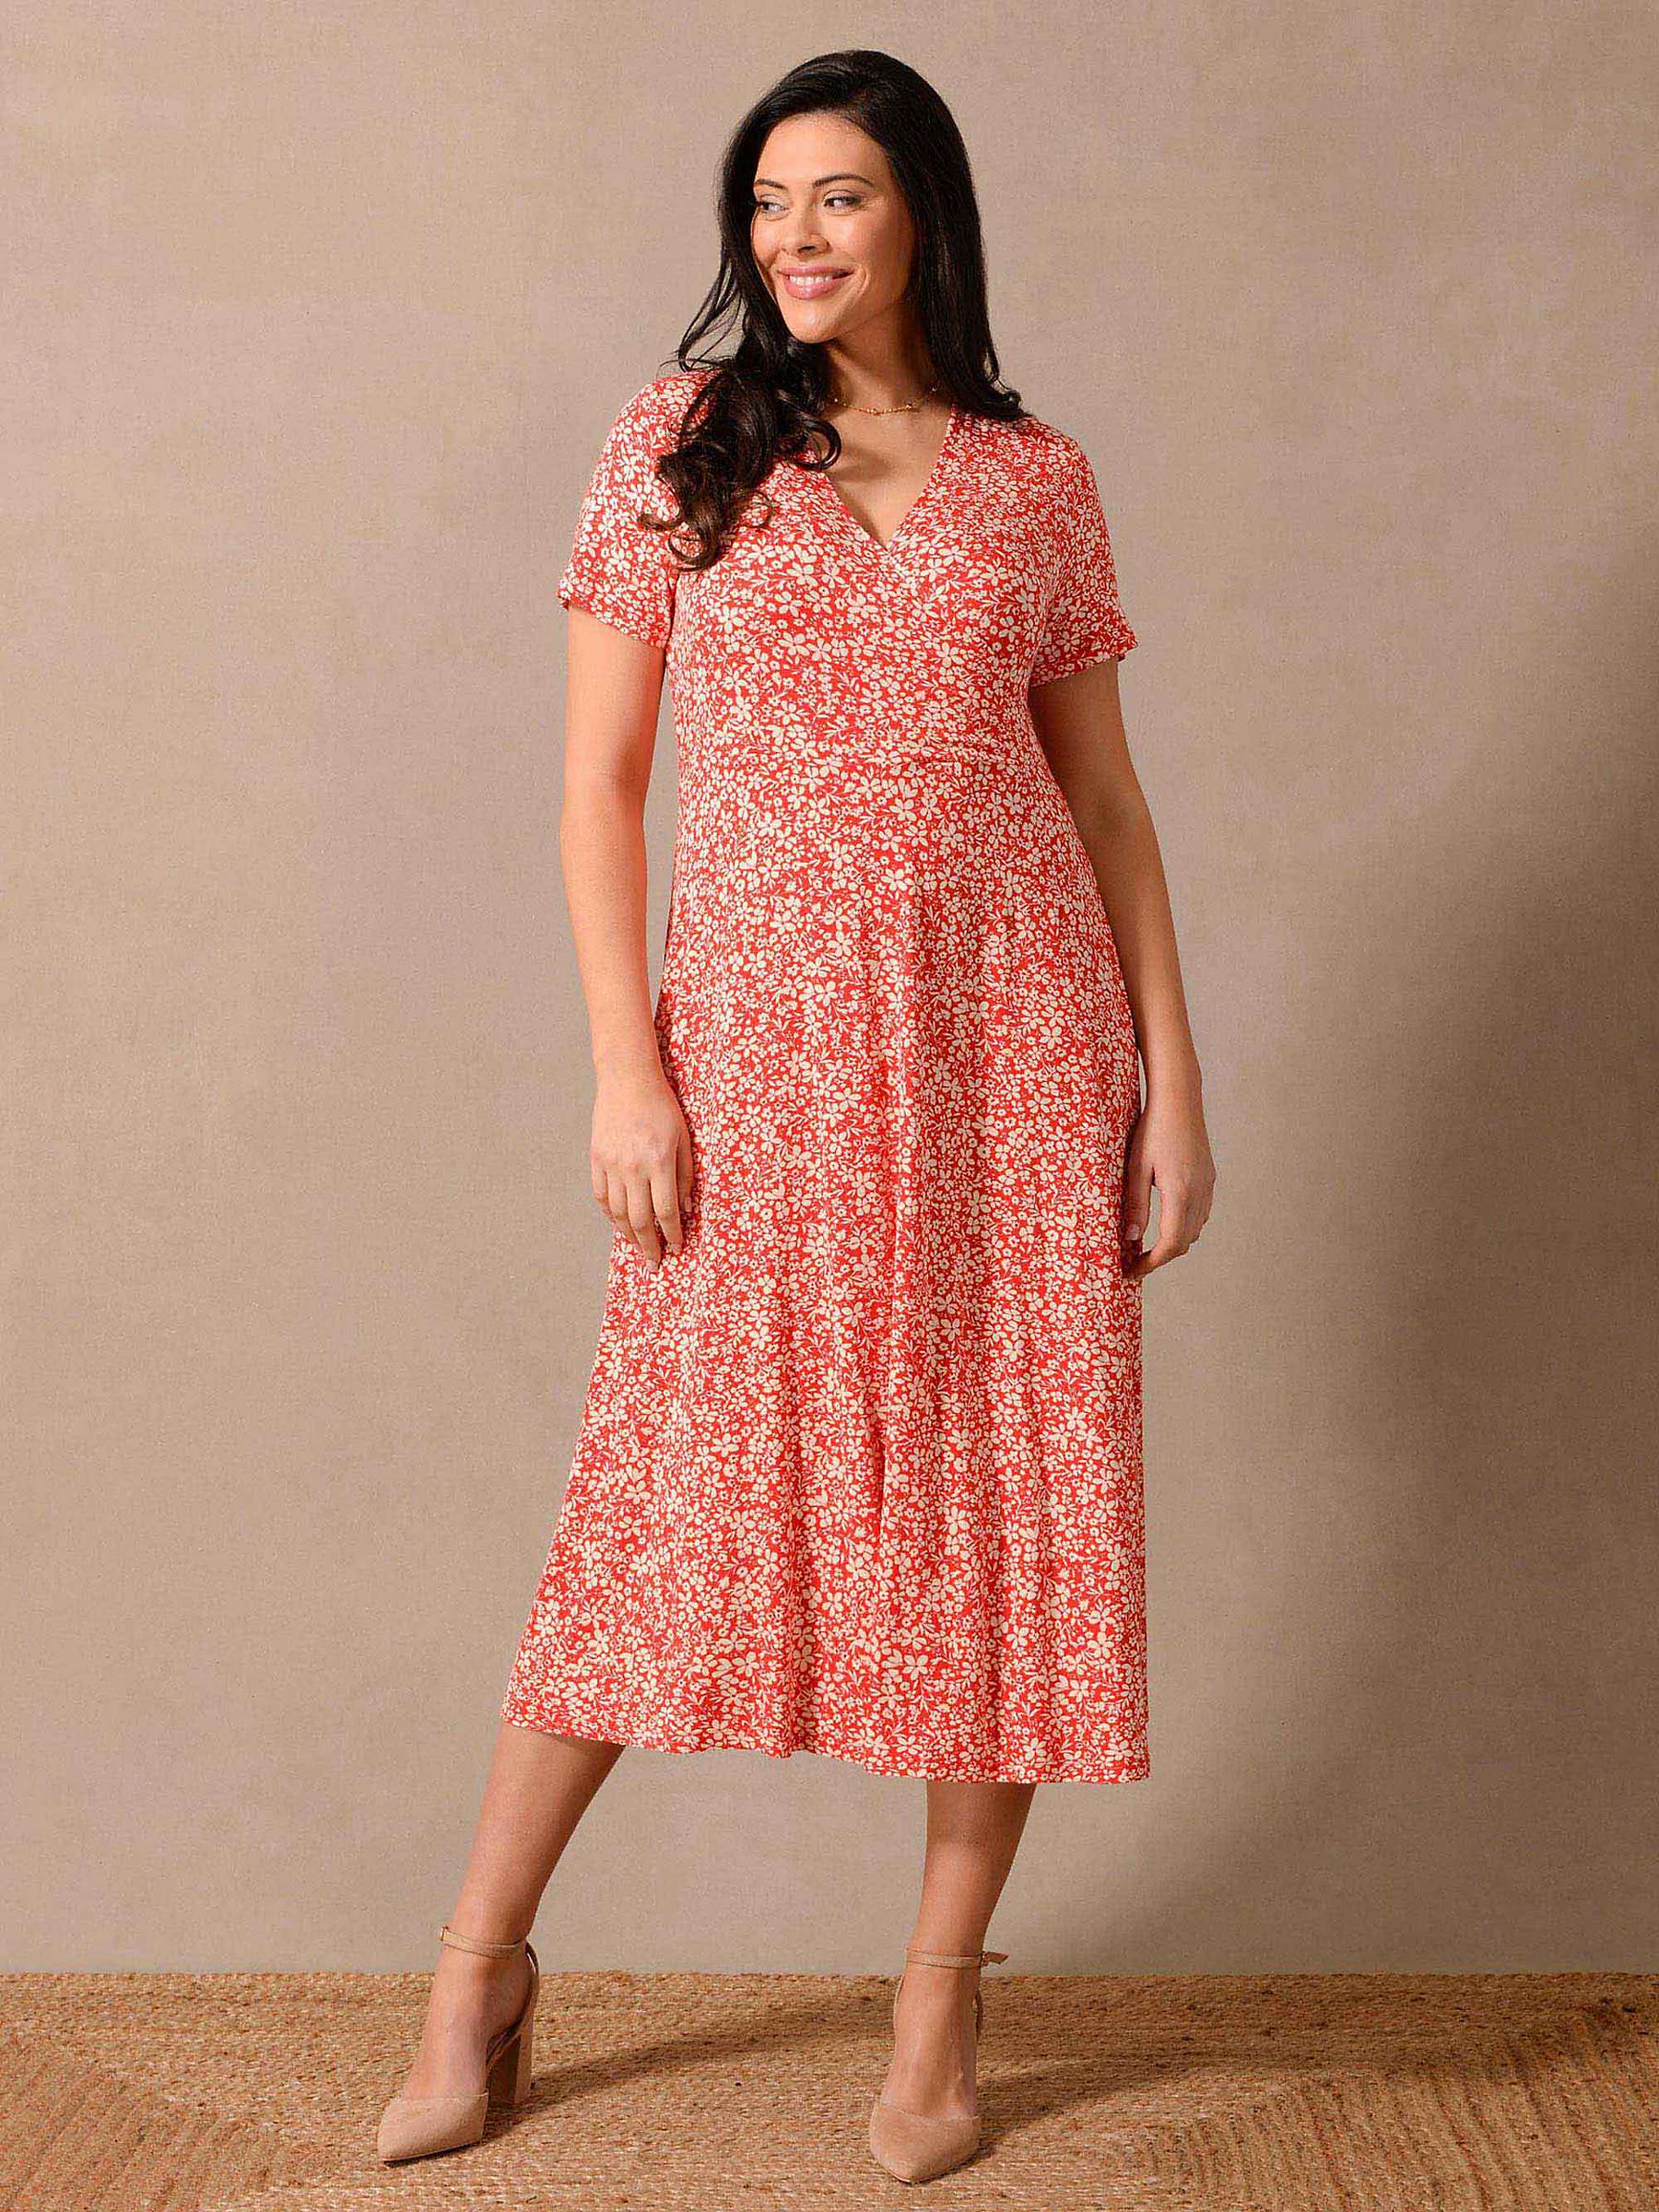 Buy Live Unlimited Ditsy Print Midi Dress, Red/White Online at johnlewis.com